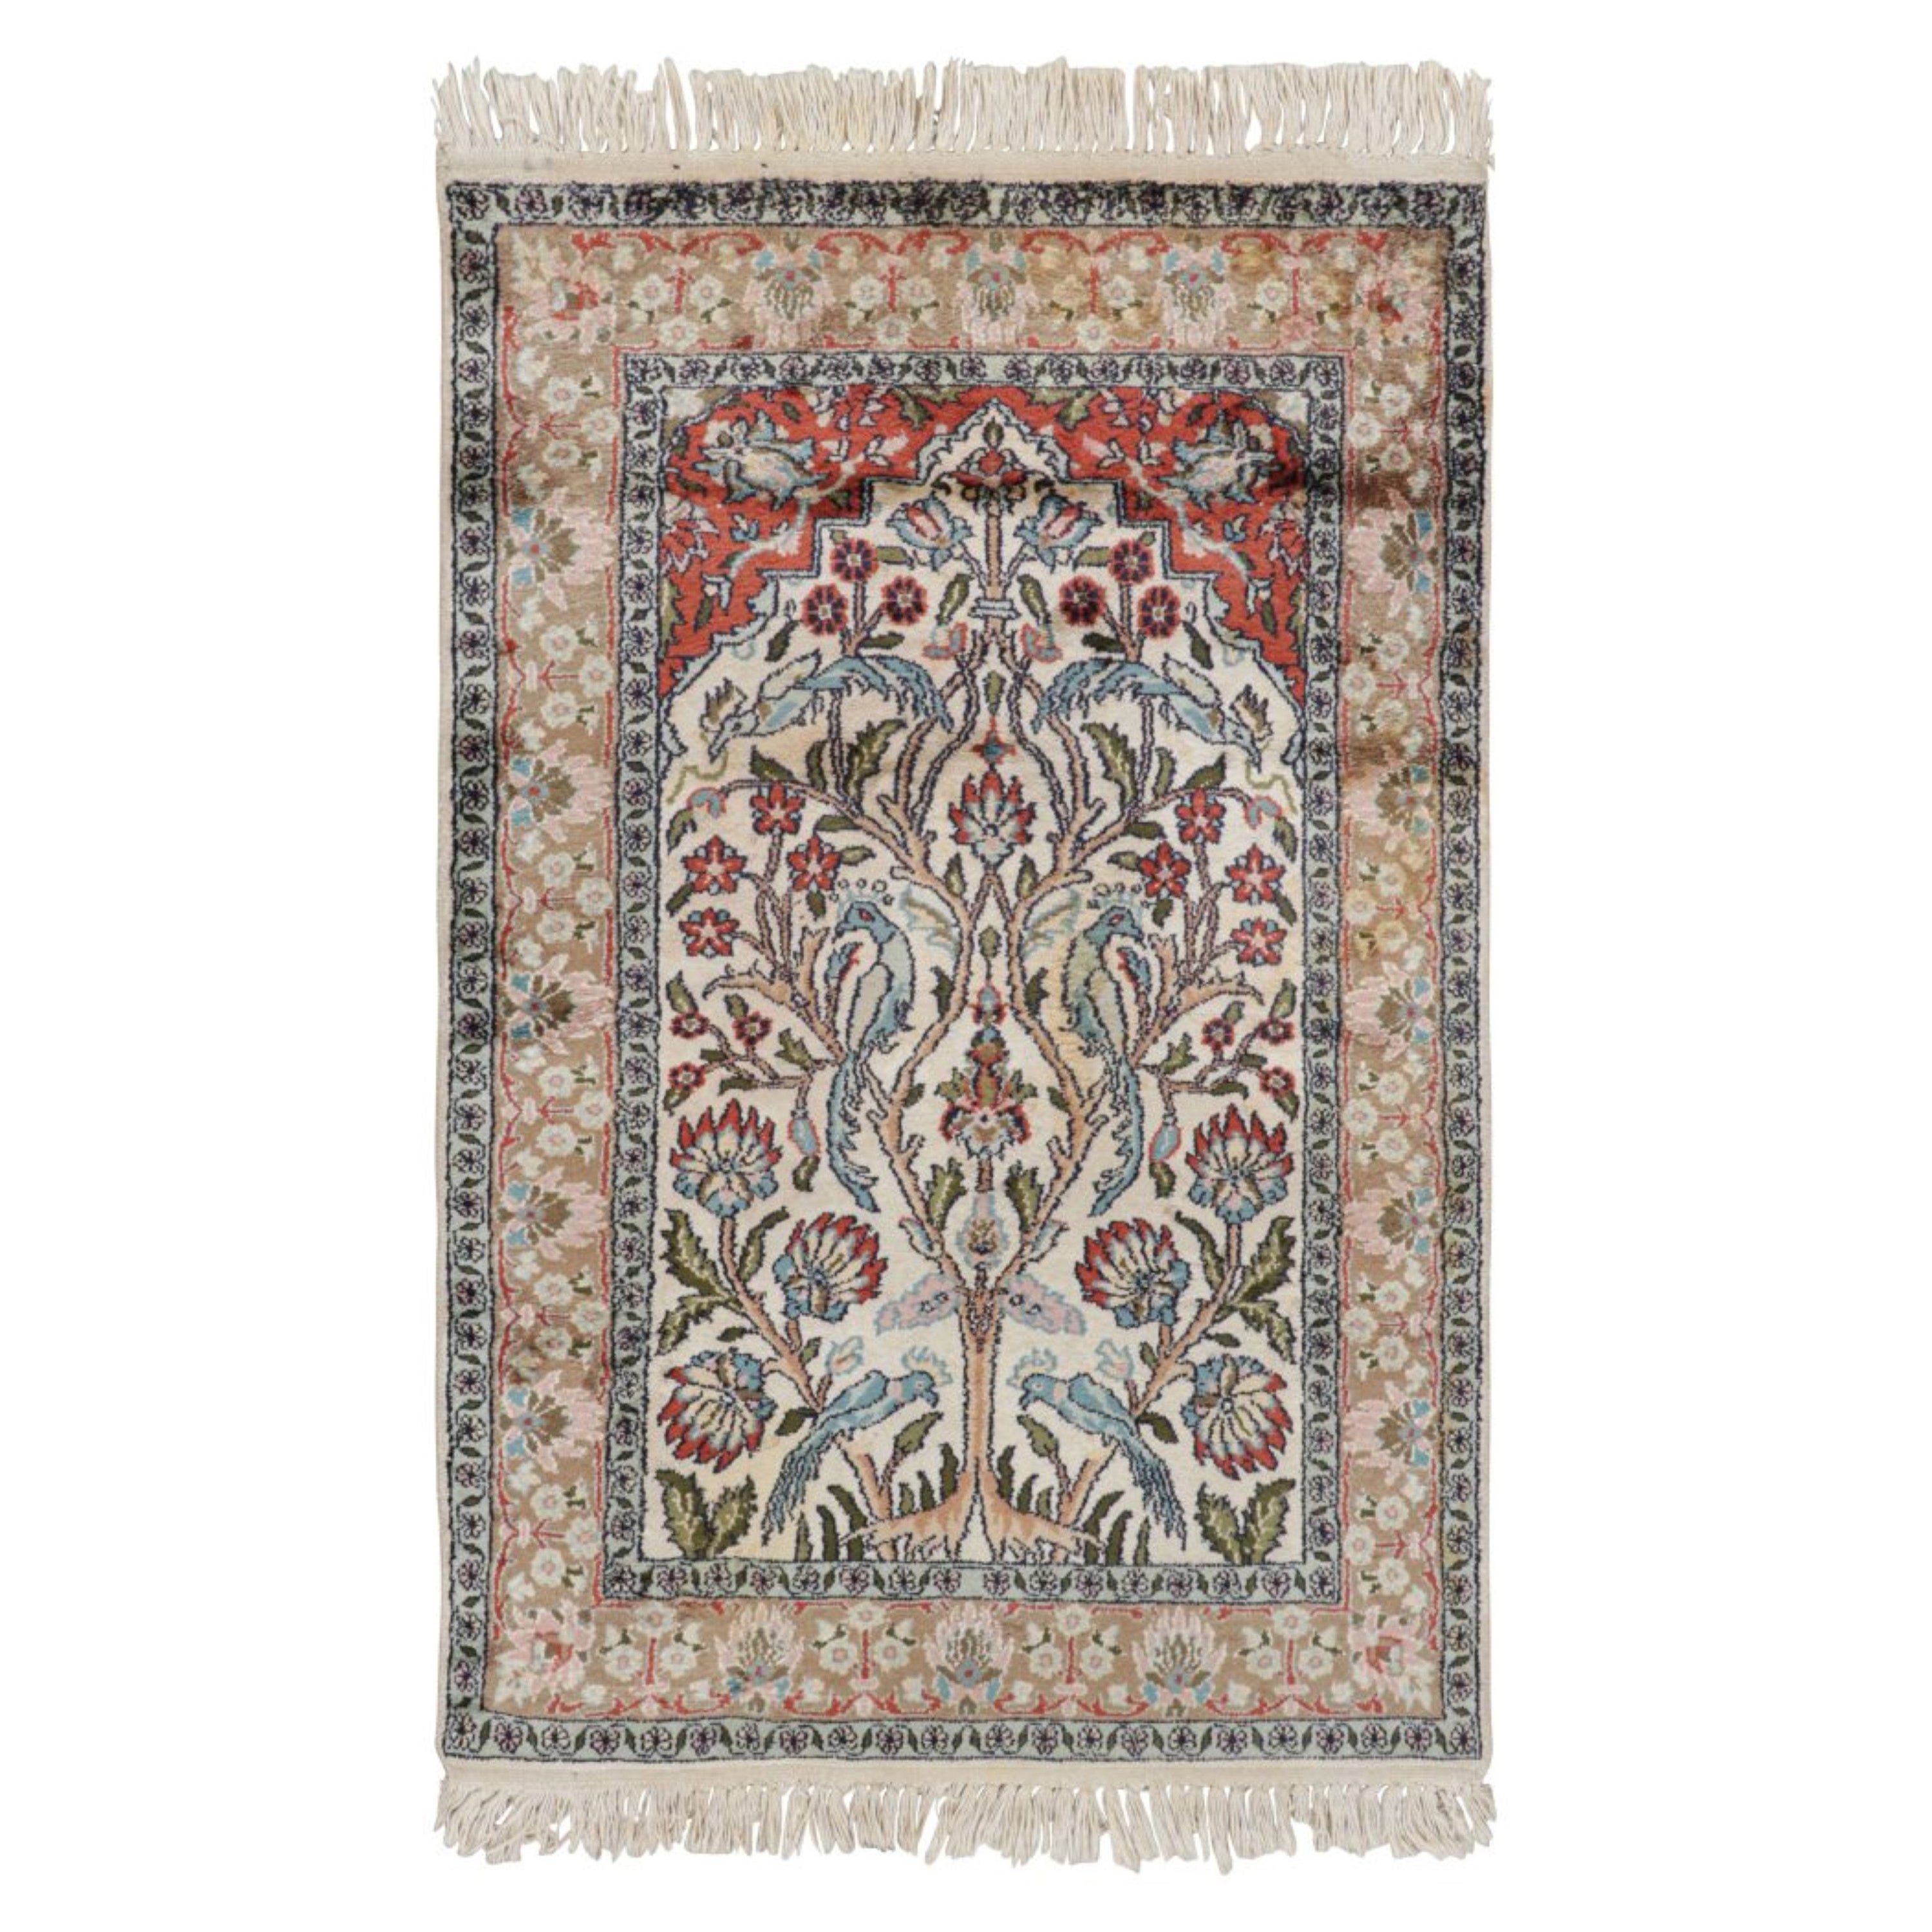 Antique Kashmir Rug With Pictorials and Floral Patterns, From Rug & Kilim